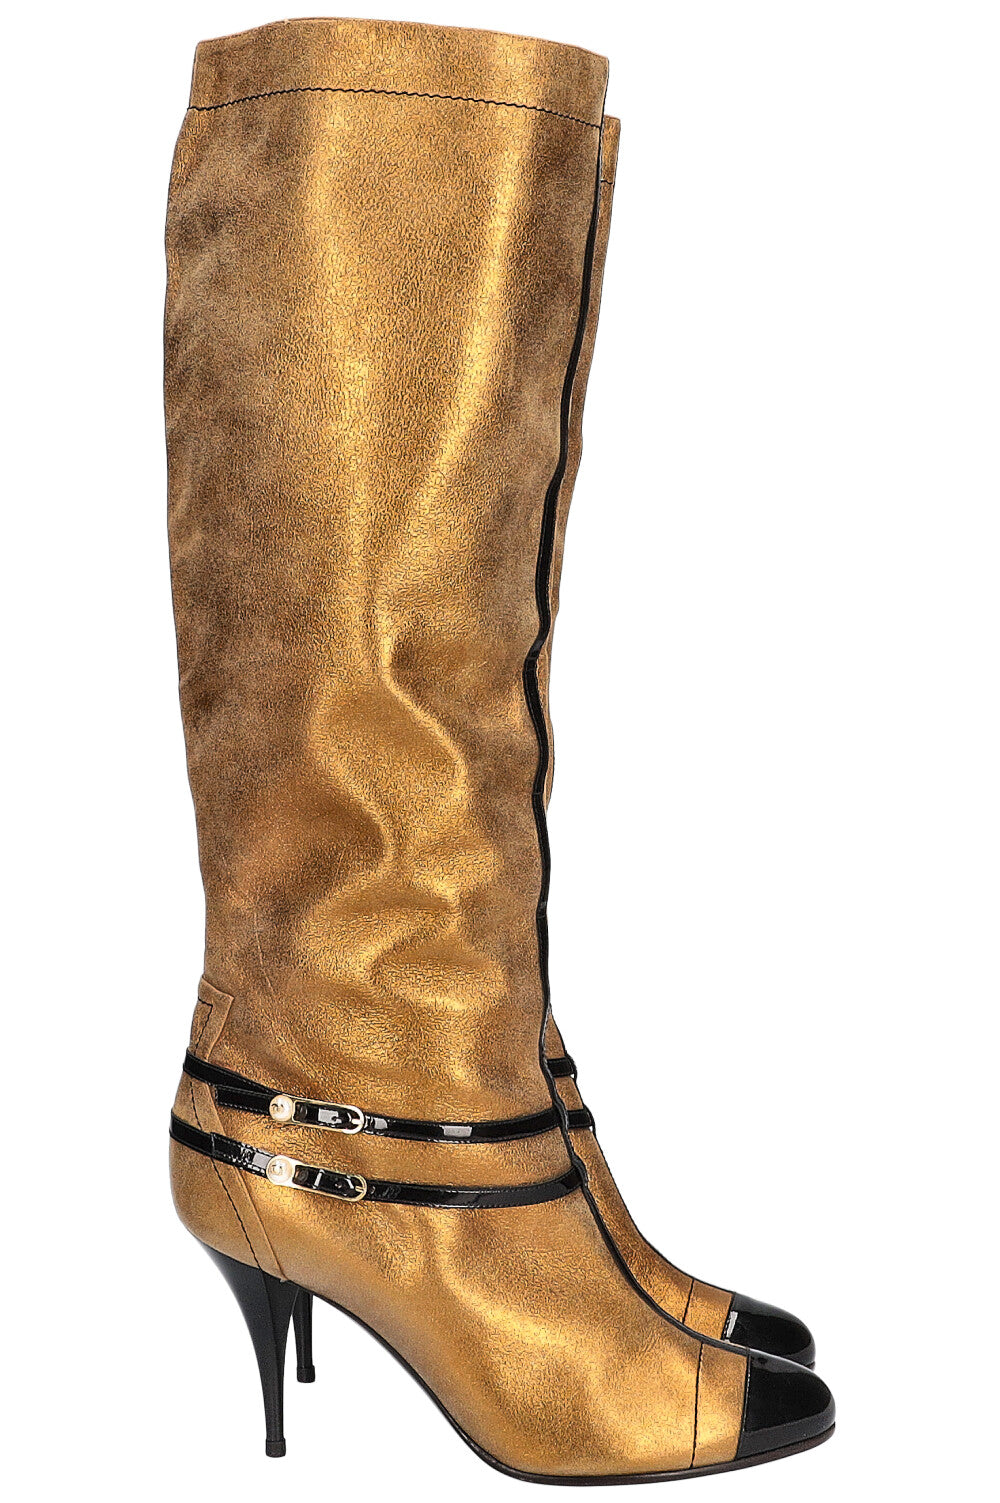 CHANEL Boots Gold